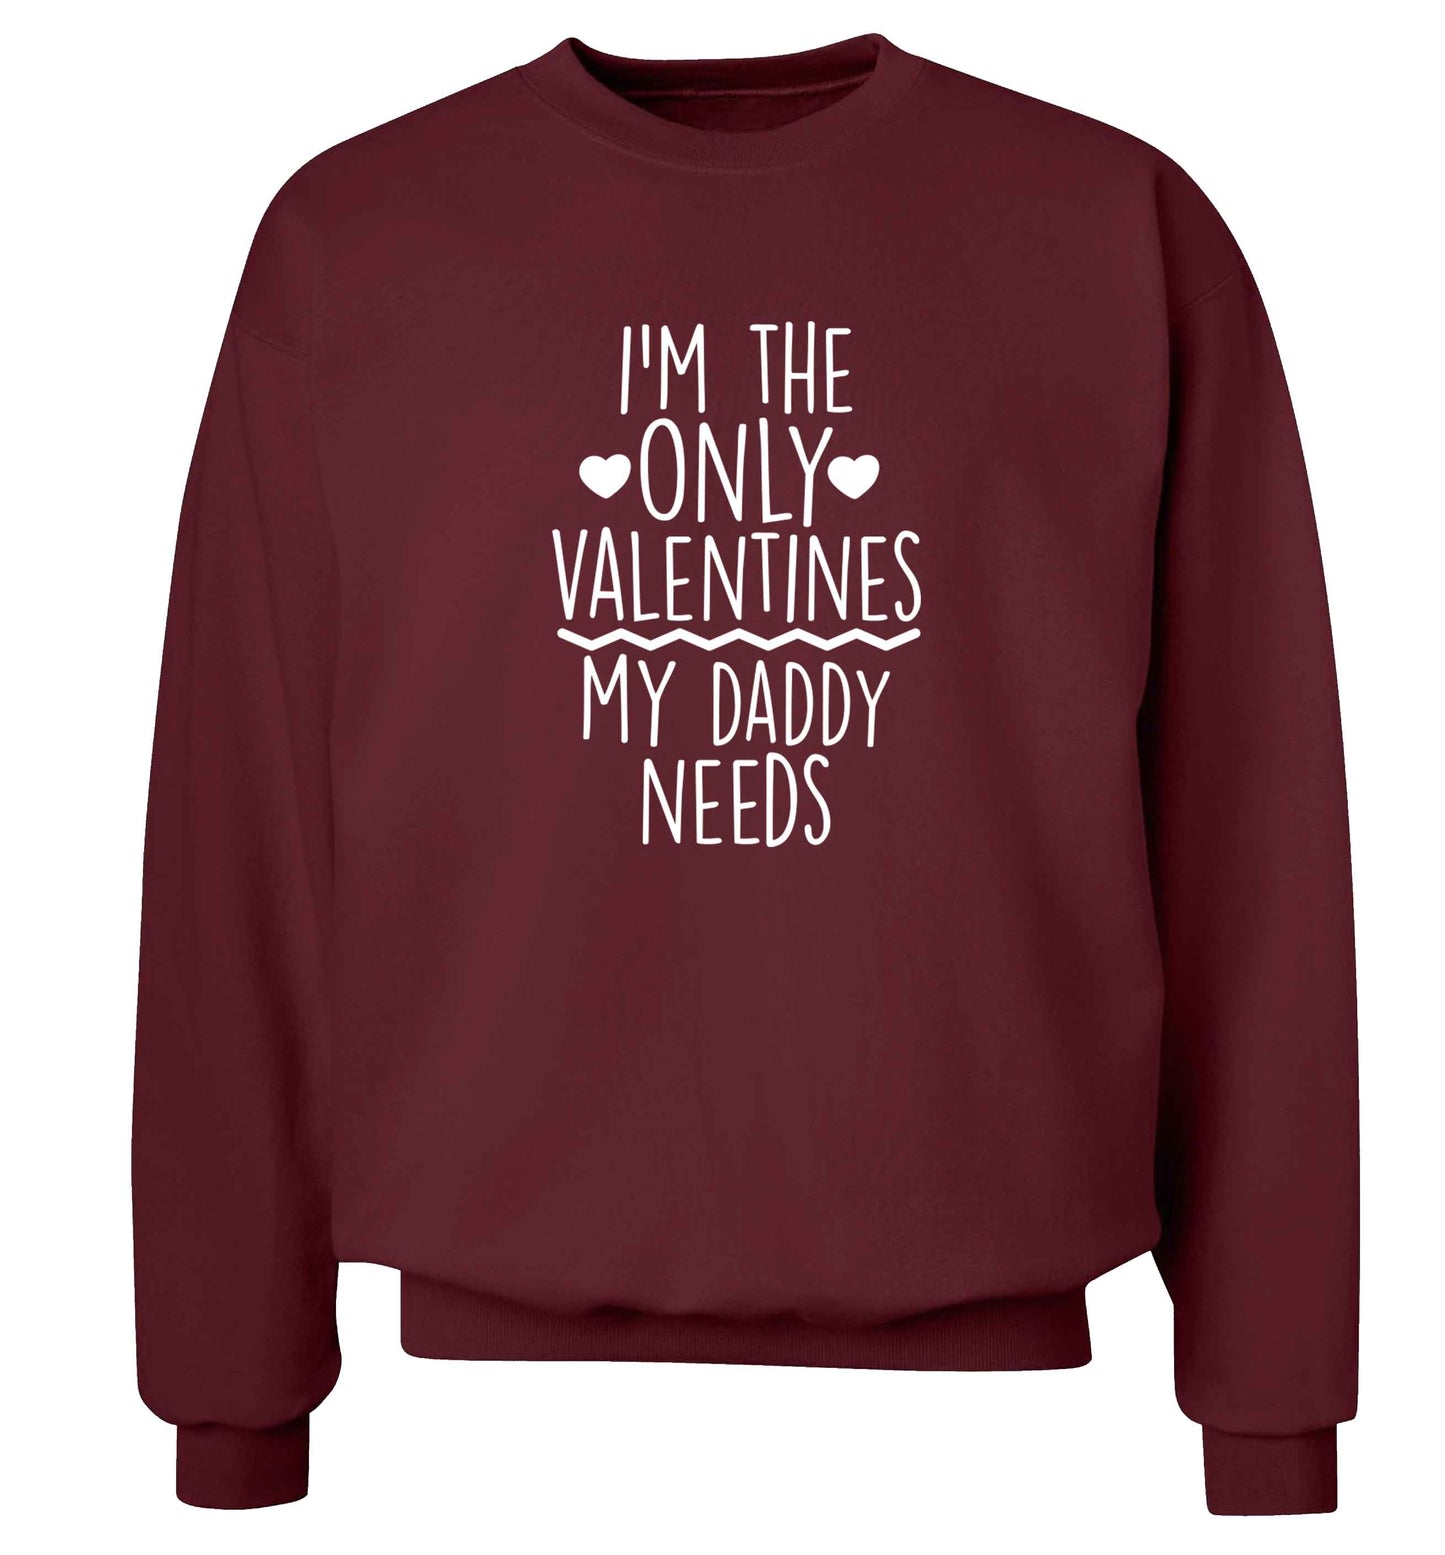 I'm the only valentines my daddy needs adult's unisex maroon sweater 2XL